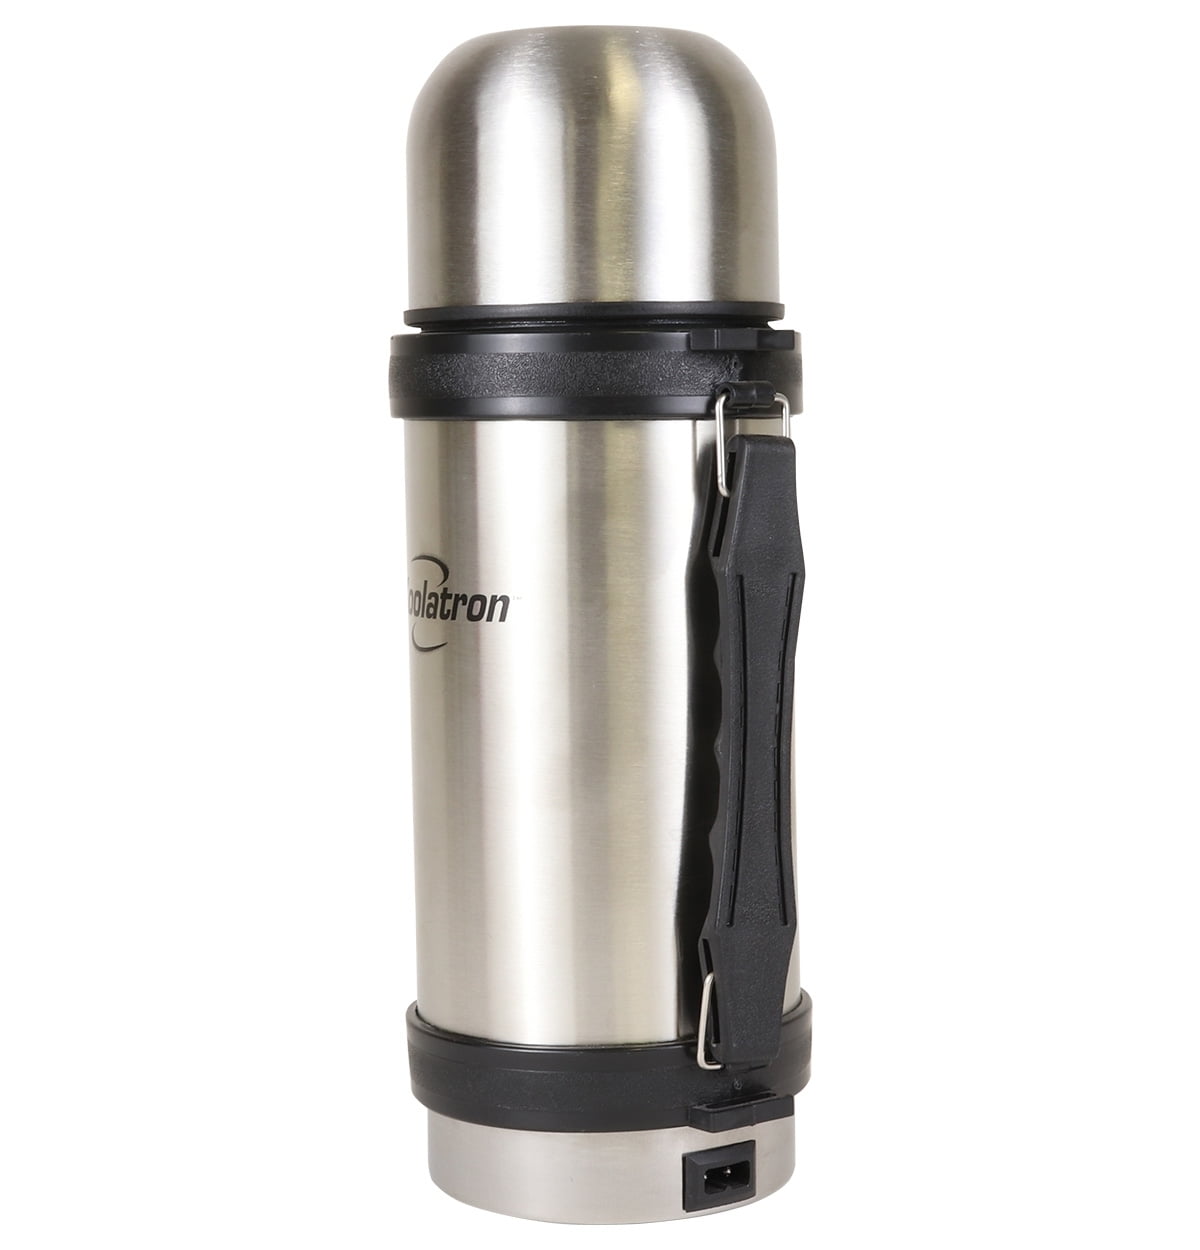 Koolatron 12V Insulated Vacuum Flask with Heater, 1L Silver and Black  Stainless Steel, Push Button Dispenser, for Car, SUV, Truck, RV, Boat